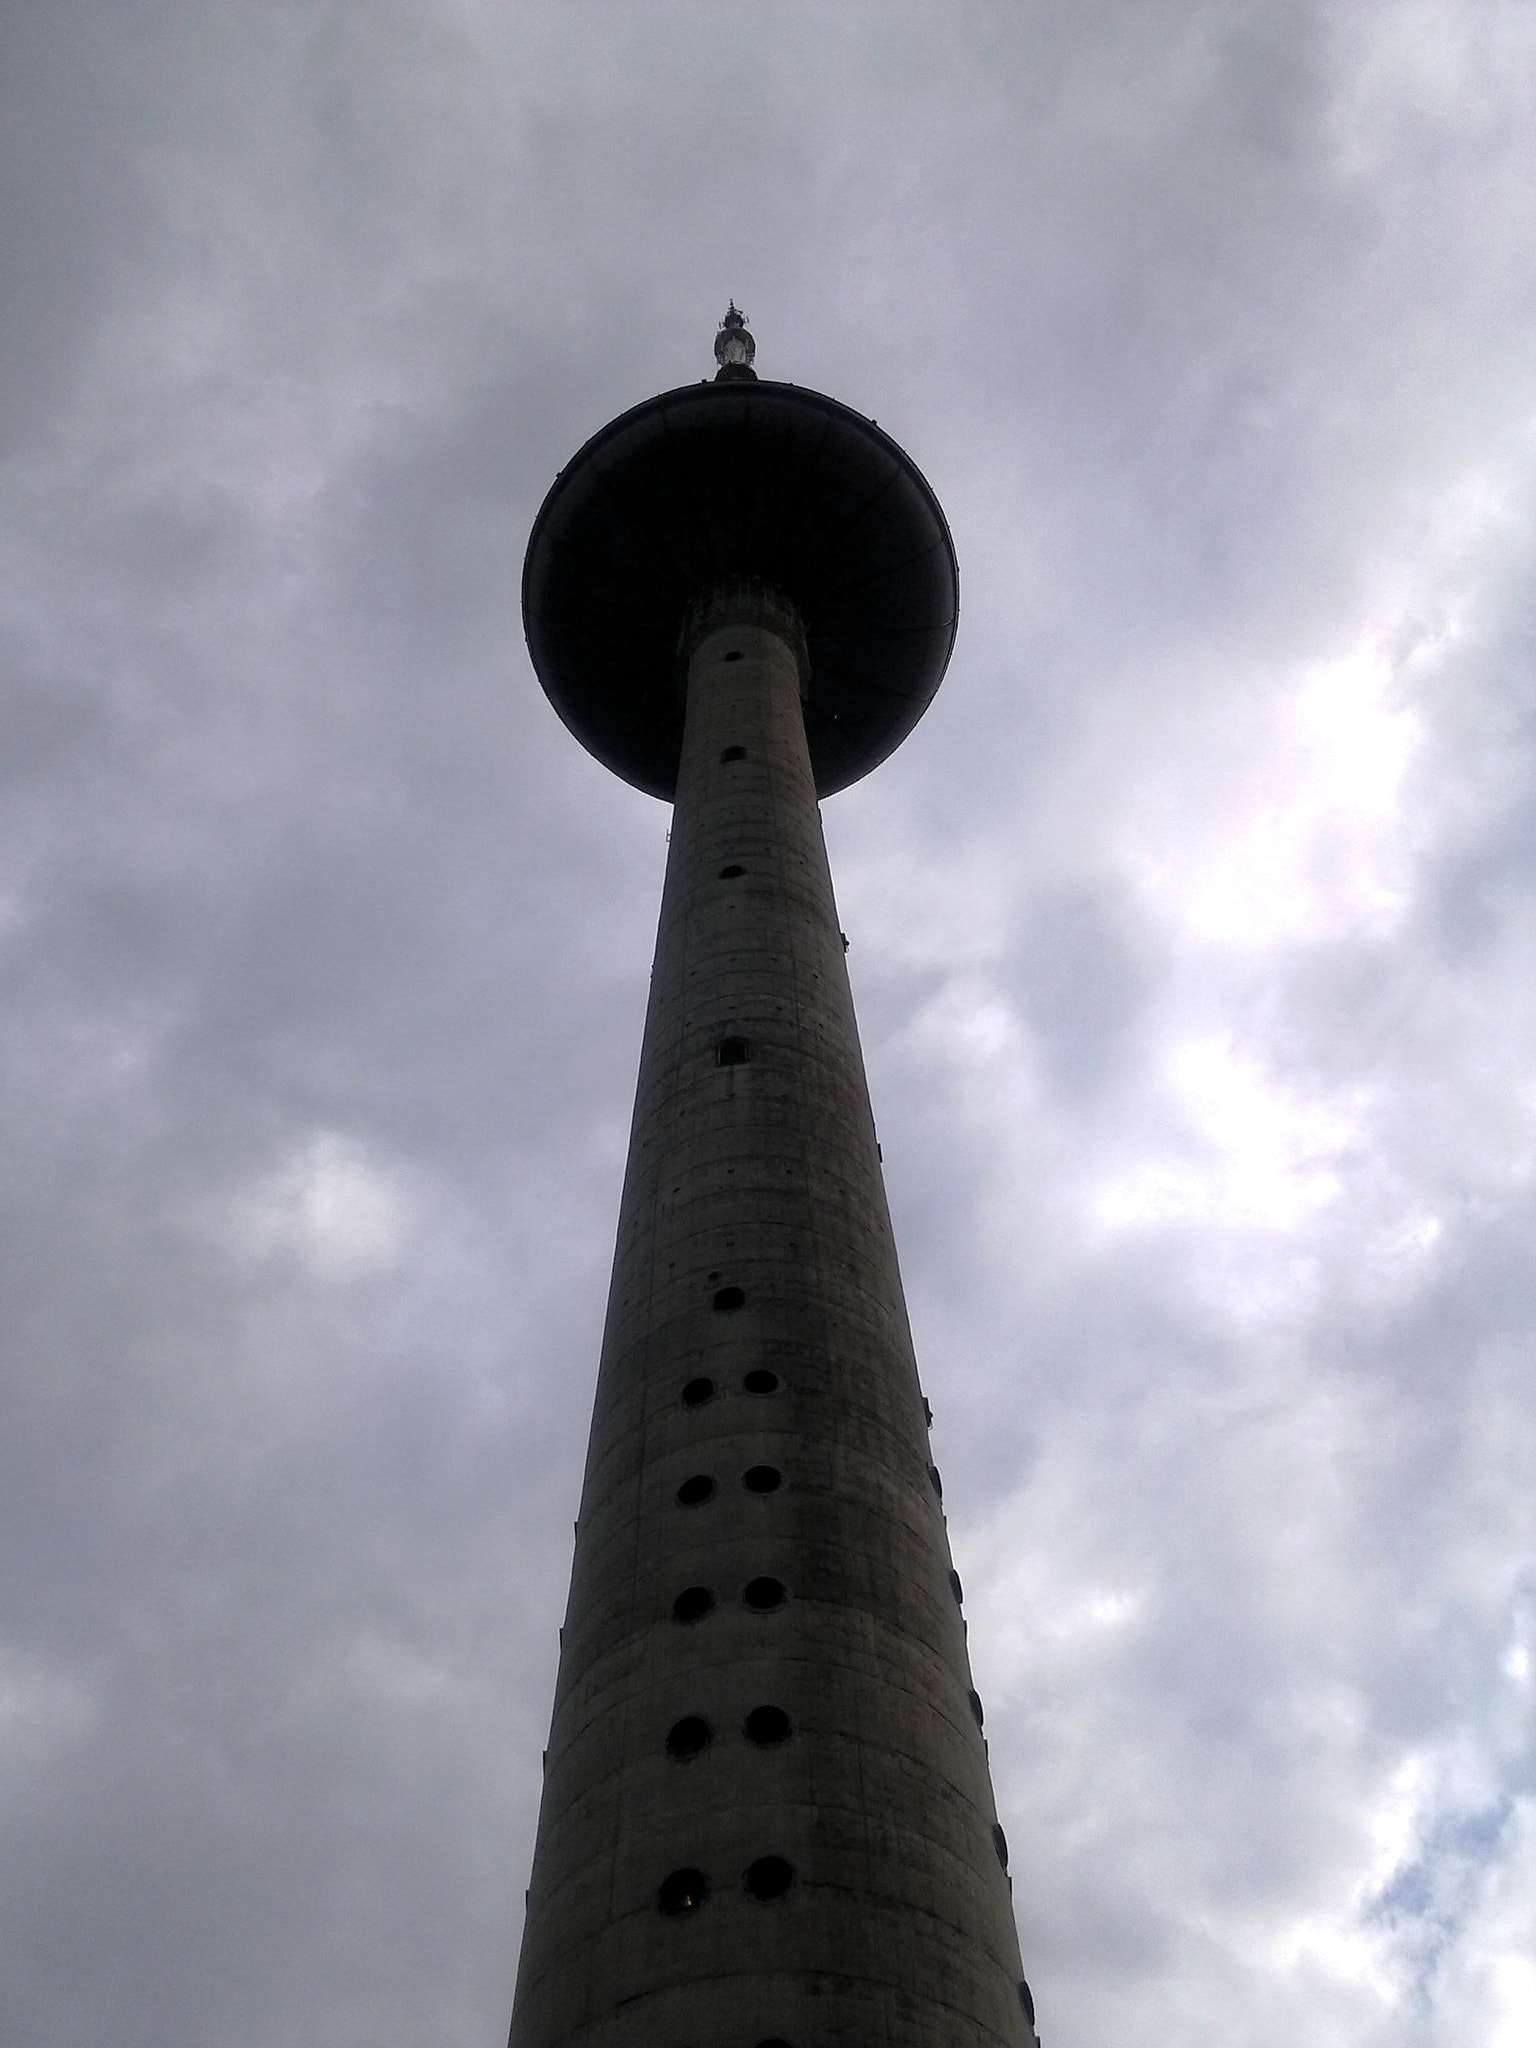 Nokia C6-00 sample photo. Tv tower in vilnius, lithuania photography